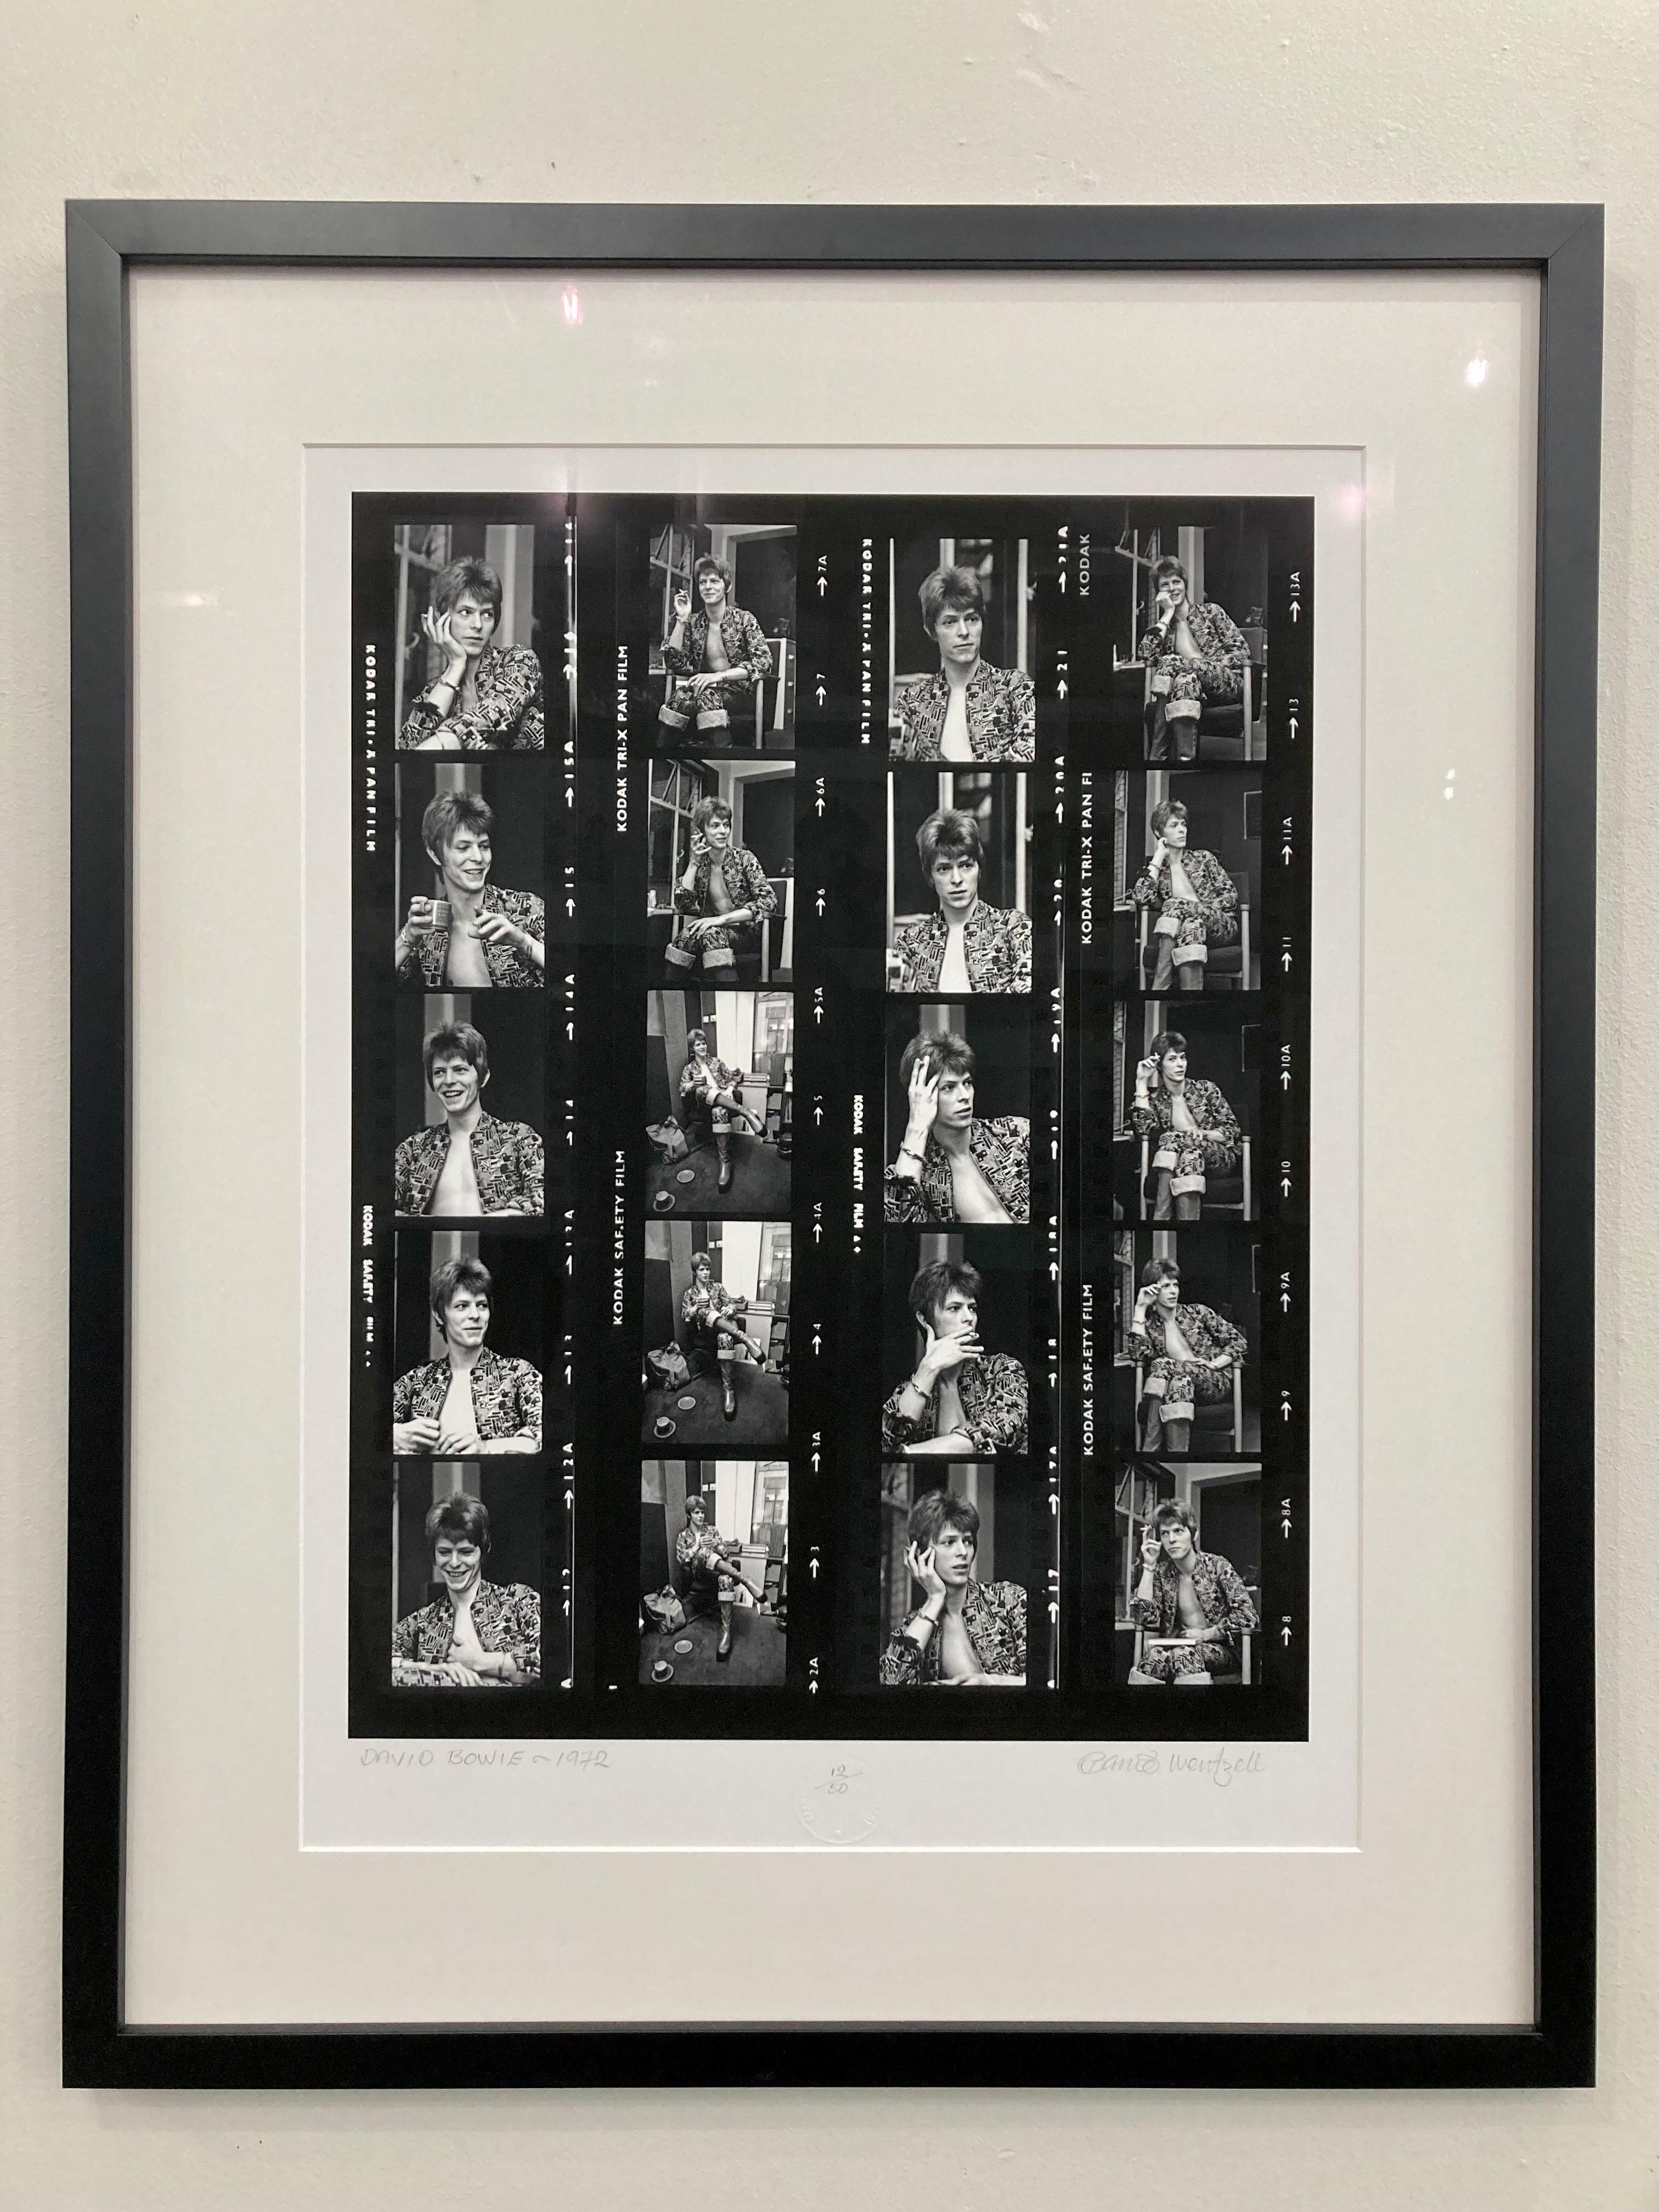 David Bowie 1972 Contact Sheet Print, Framed - Photorealist Photograph by Barrie Wentzell